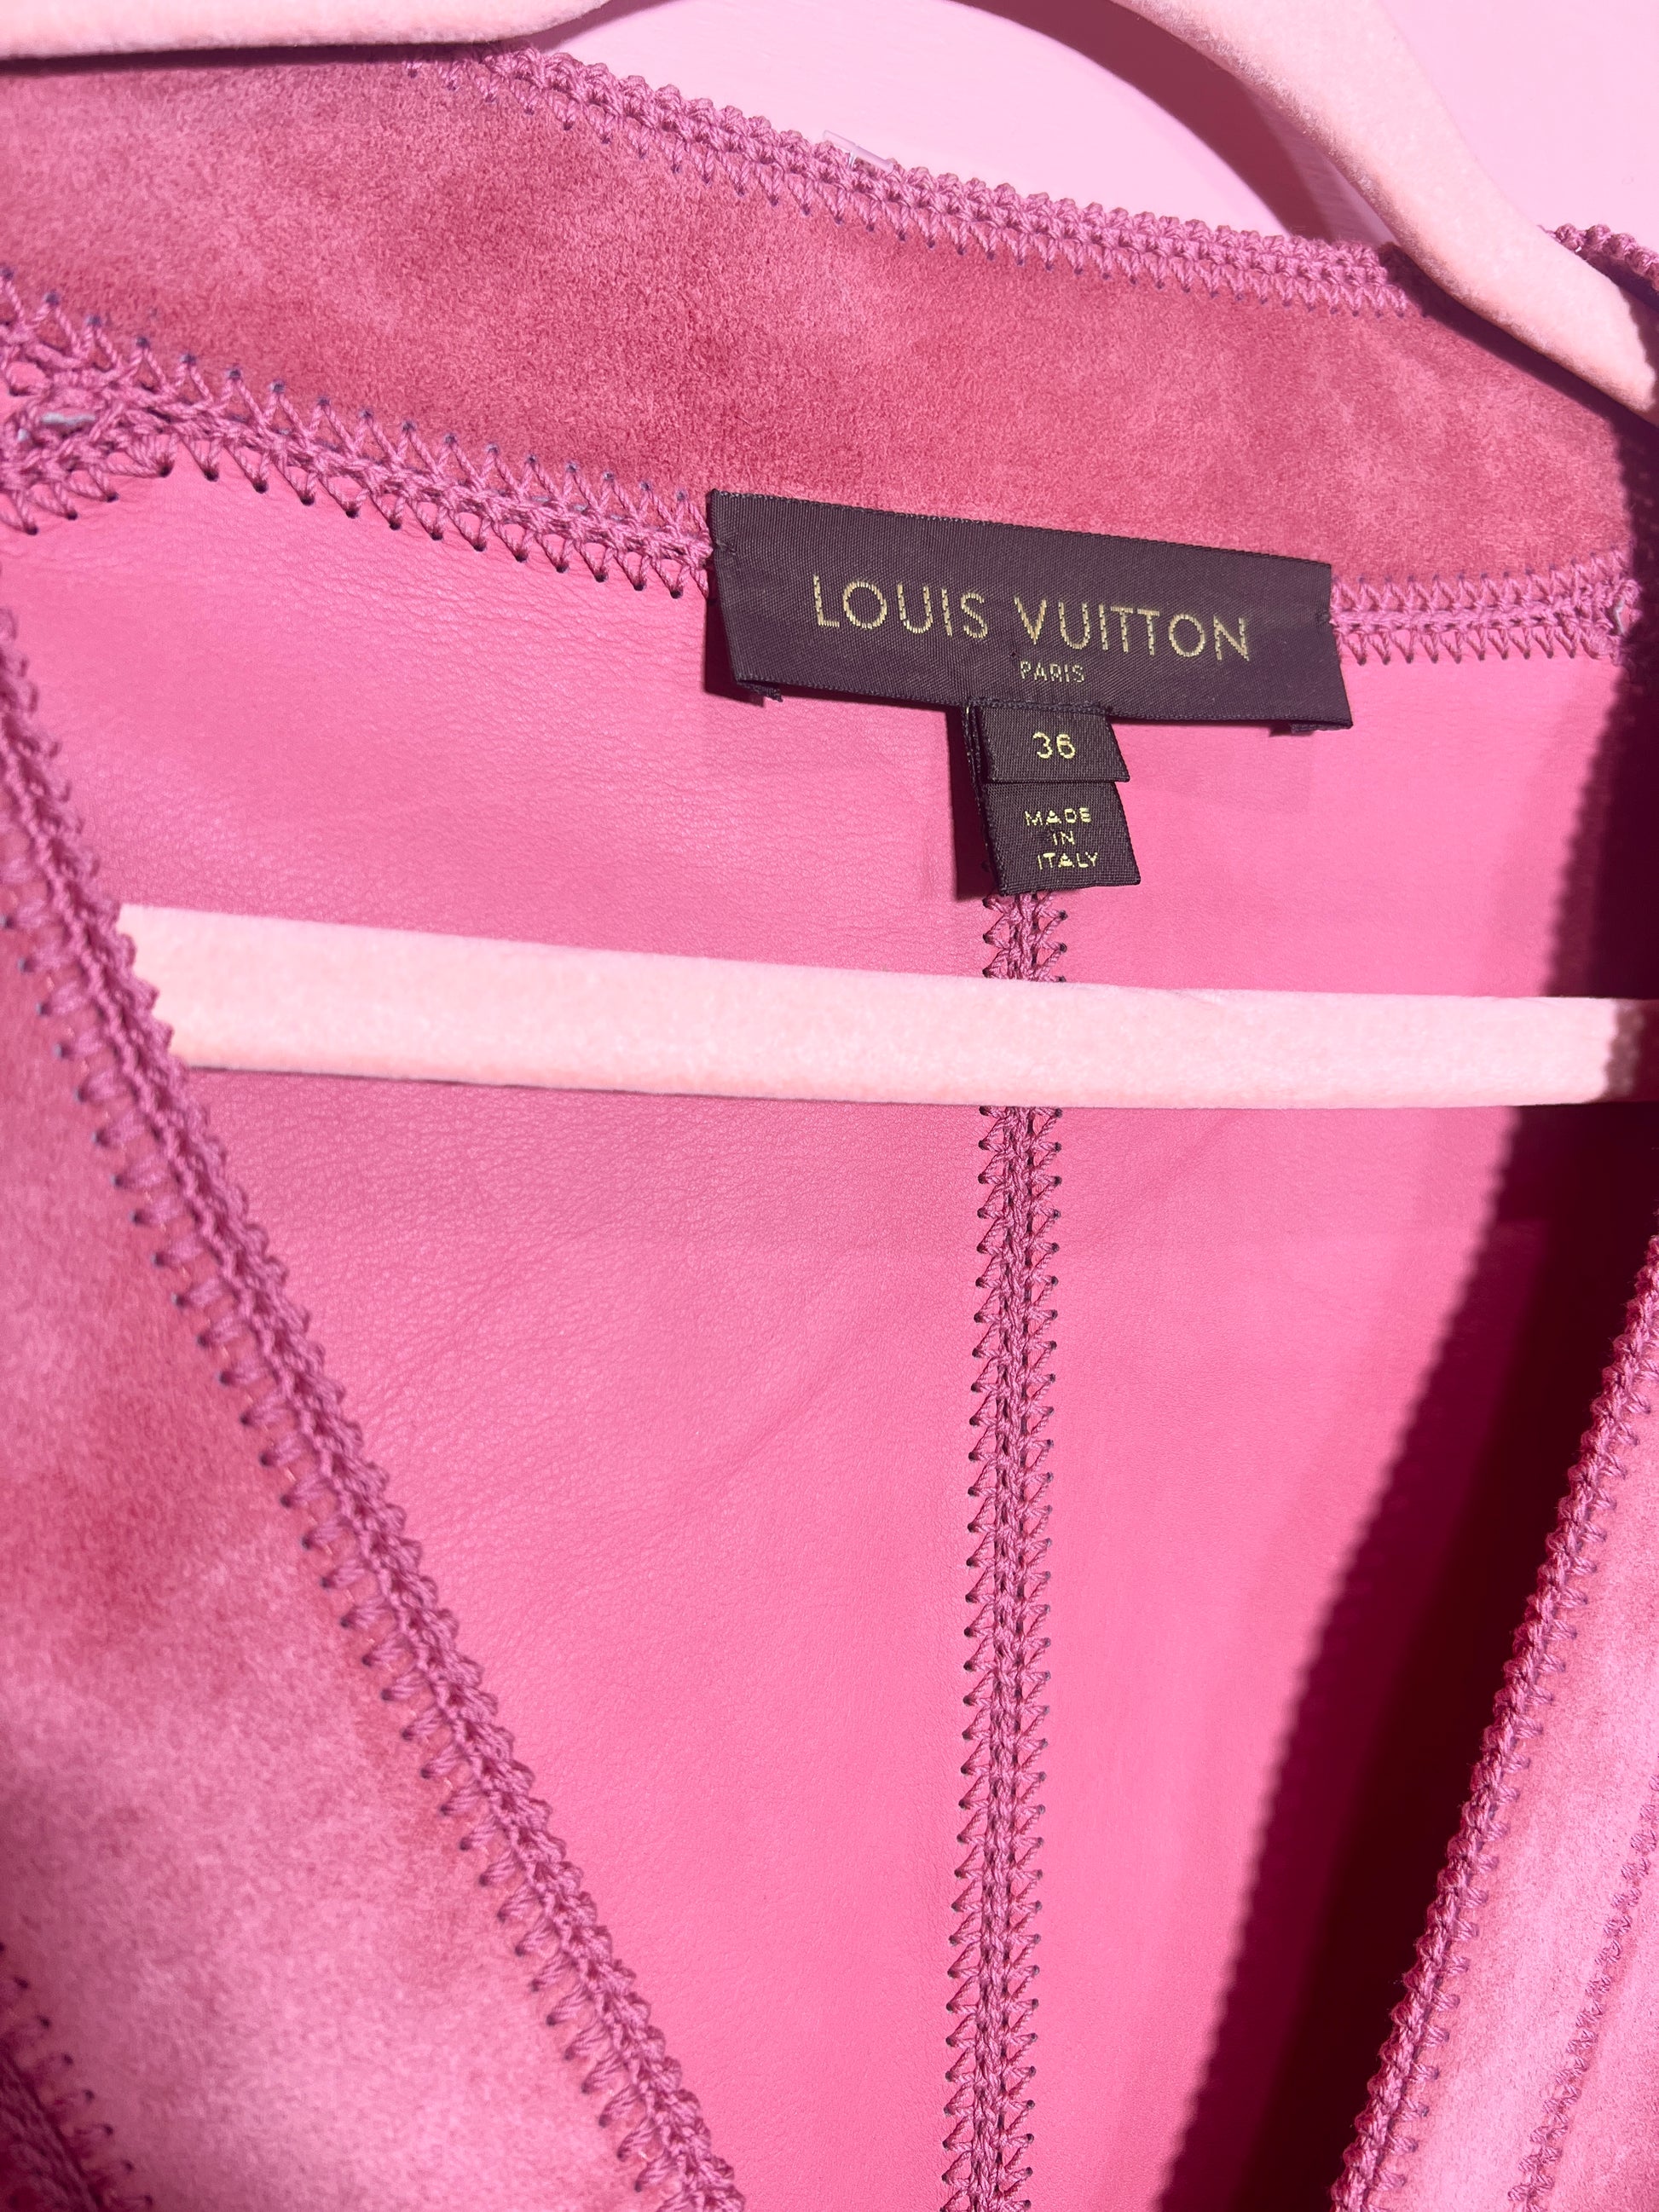 Vintage Louis Vuitton Pink Skirt Suede With Crochet Trim Matching Jacket  (SOLD) only skirt available